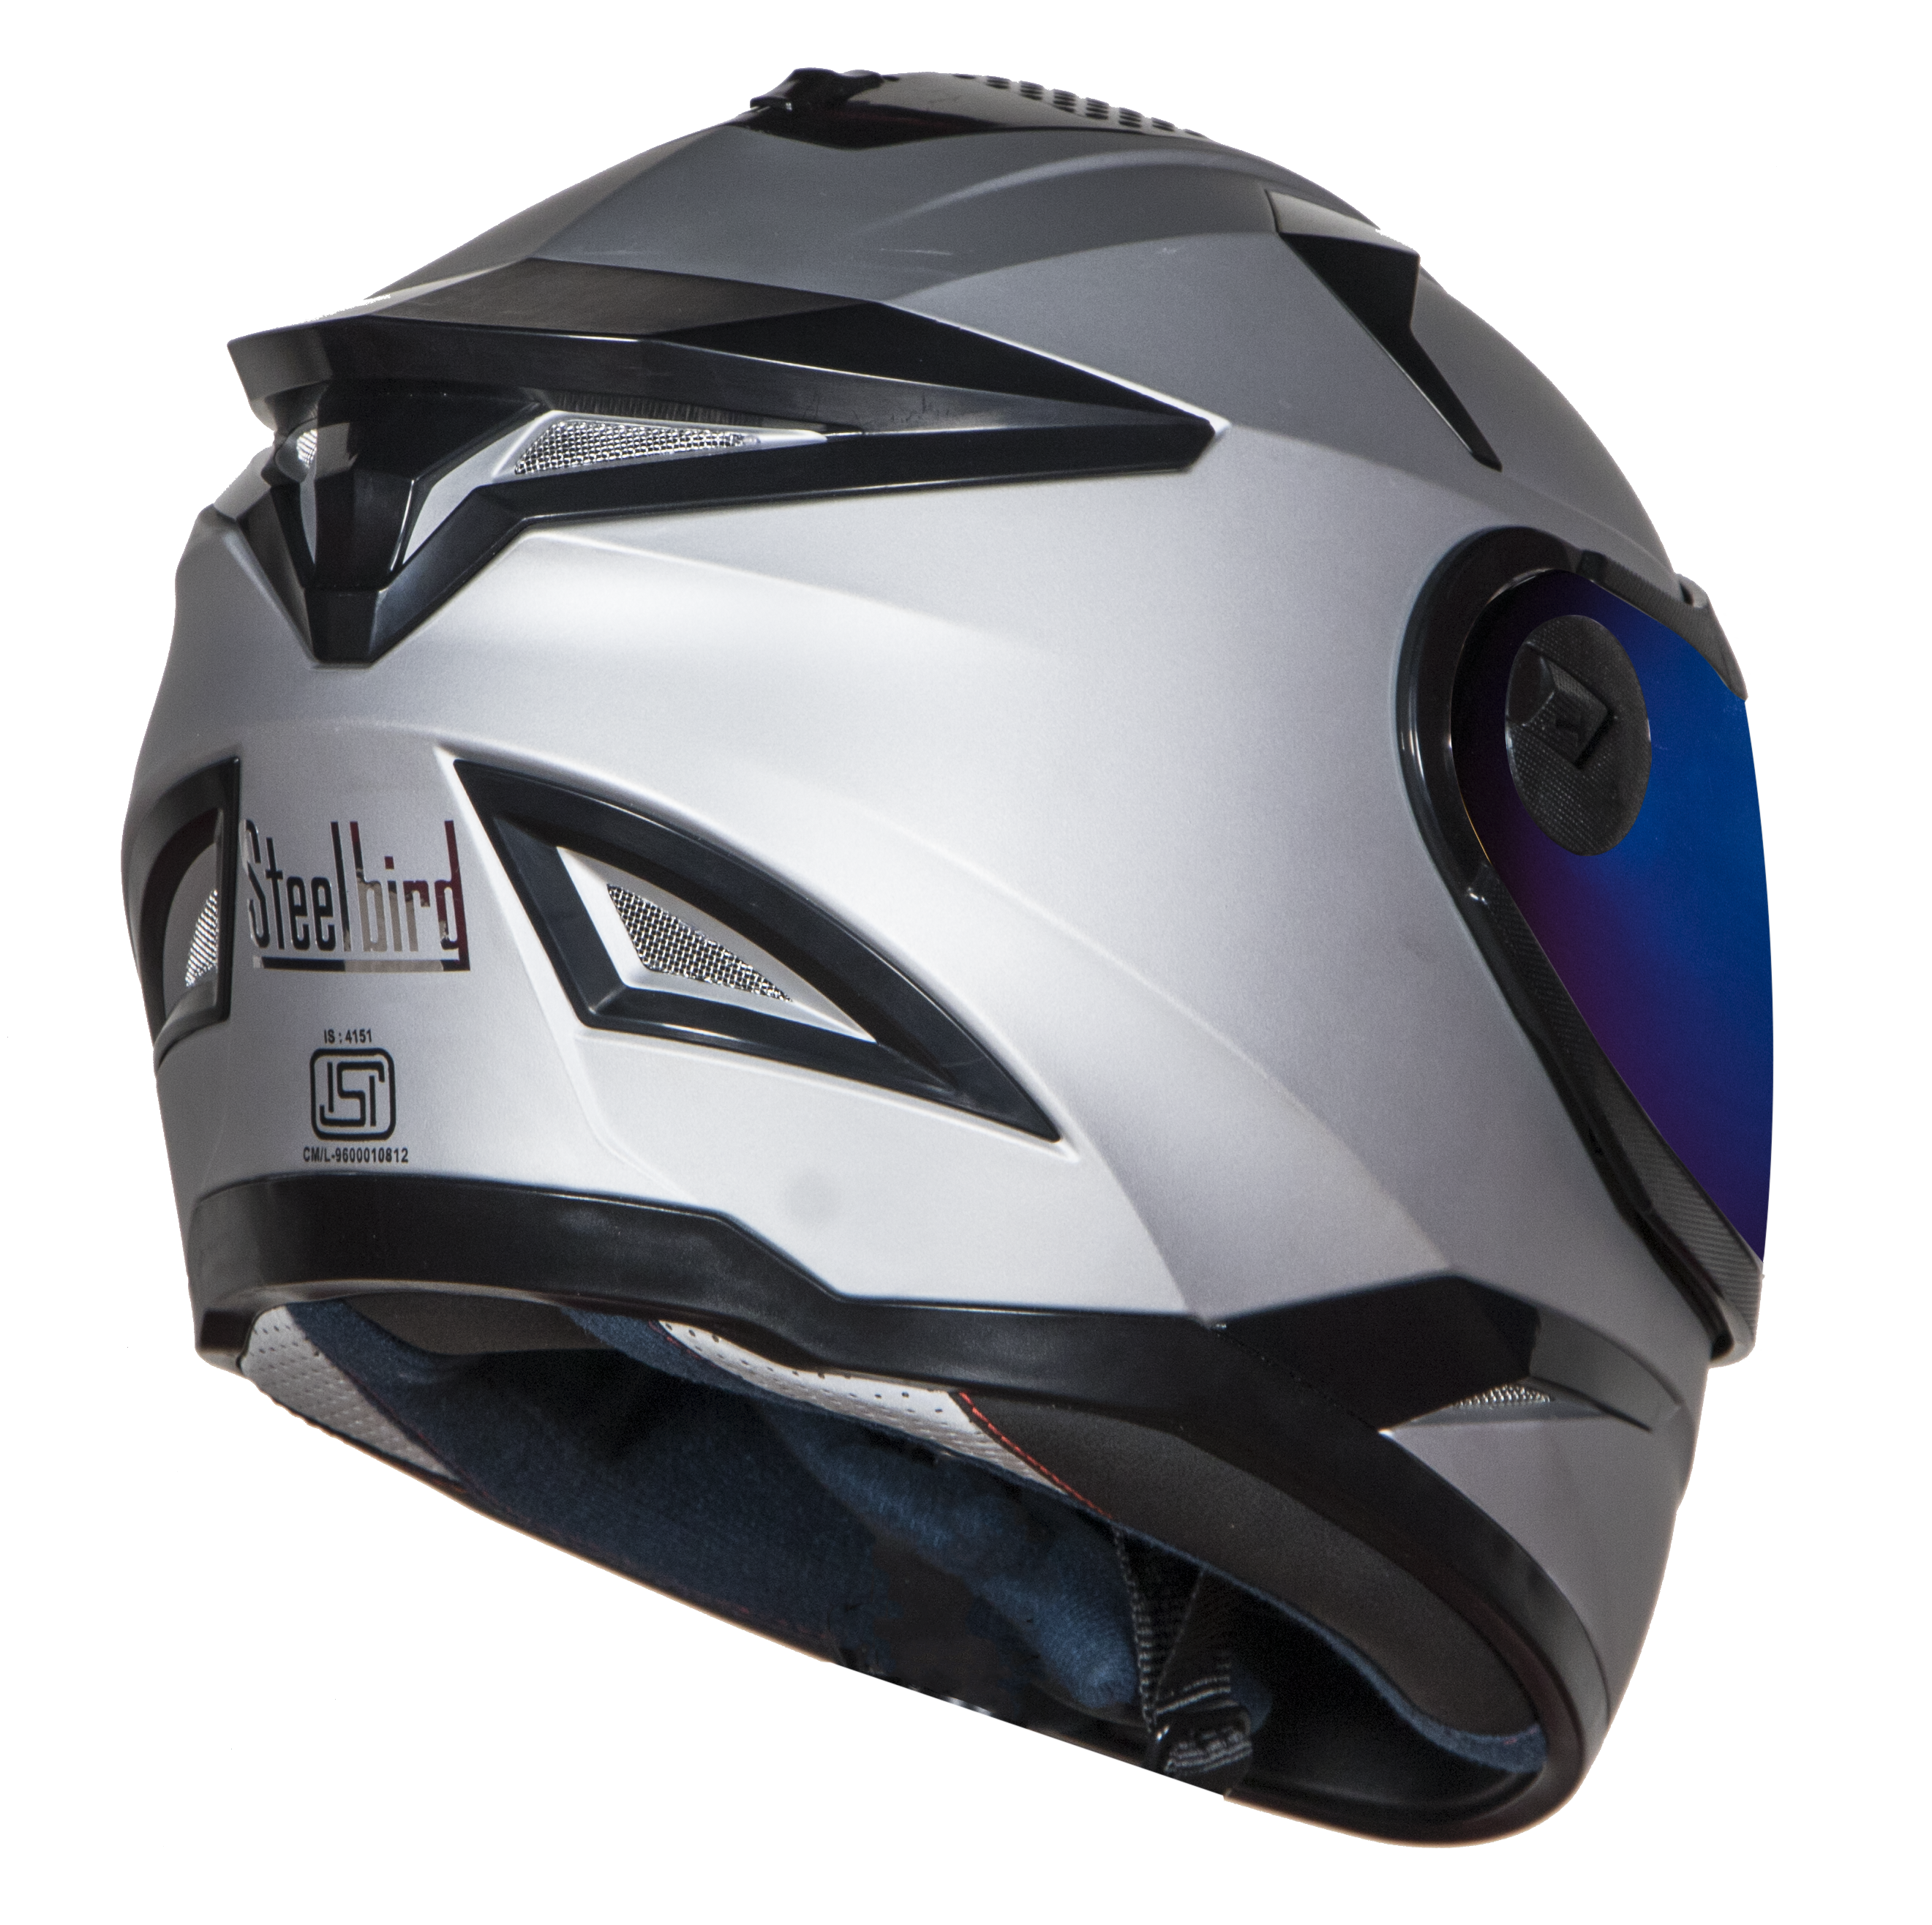 SBH-17 OPT MAT SILVER WITH CHROME BLUE VISOR (WITH EXTRA FREE CABLE LOCK AND CLEAR VISOR)